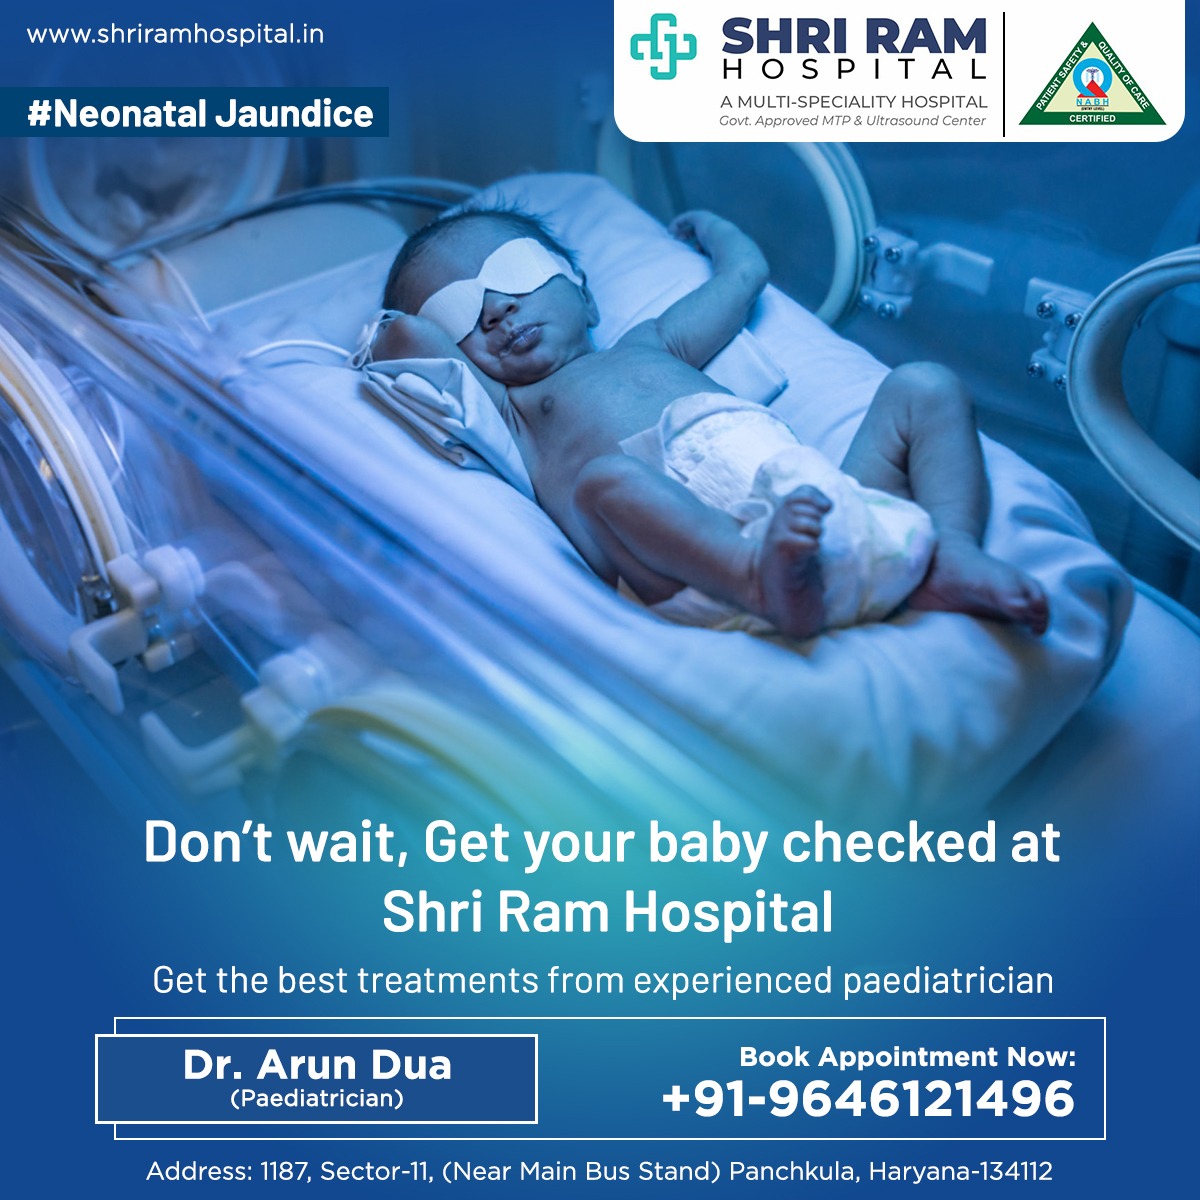 Don't wait, Get your baby checked at 𝐒𝐡𝐫𝐢 𝐑𝐚𝐦 𝐇𝐨𝐬𝐩𝐢𝐭𝐚𝐥. 

Get the Best treatments from an experienced #pediatrician  𝗗𝗿 𝗔𝗿𝘂𝗻 𝗗𝘂𝗮 at 9646121496

#Neonataljaundice #jaundice #Childspecialist #BestChildspecialist #ExpertChildspecialist #ShriRamHospital